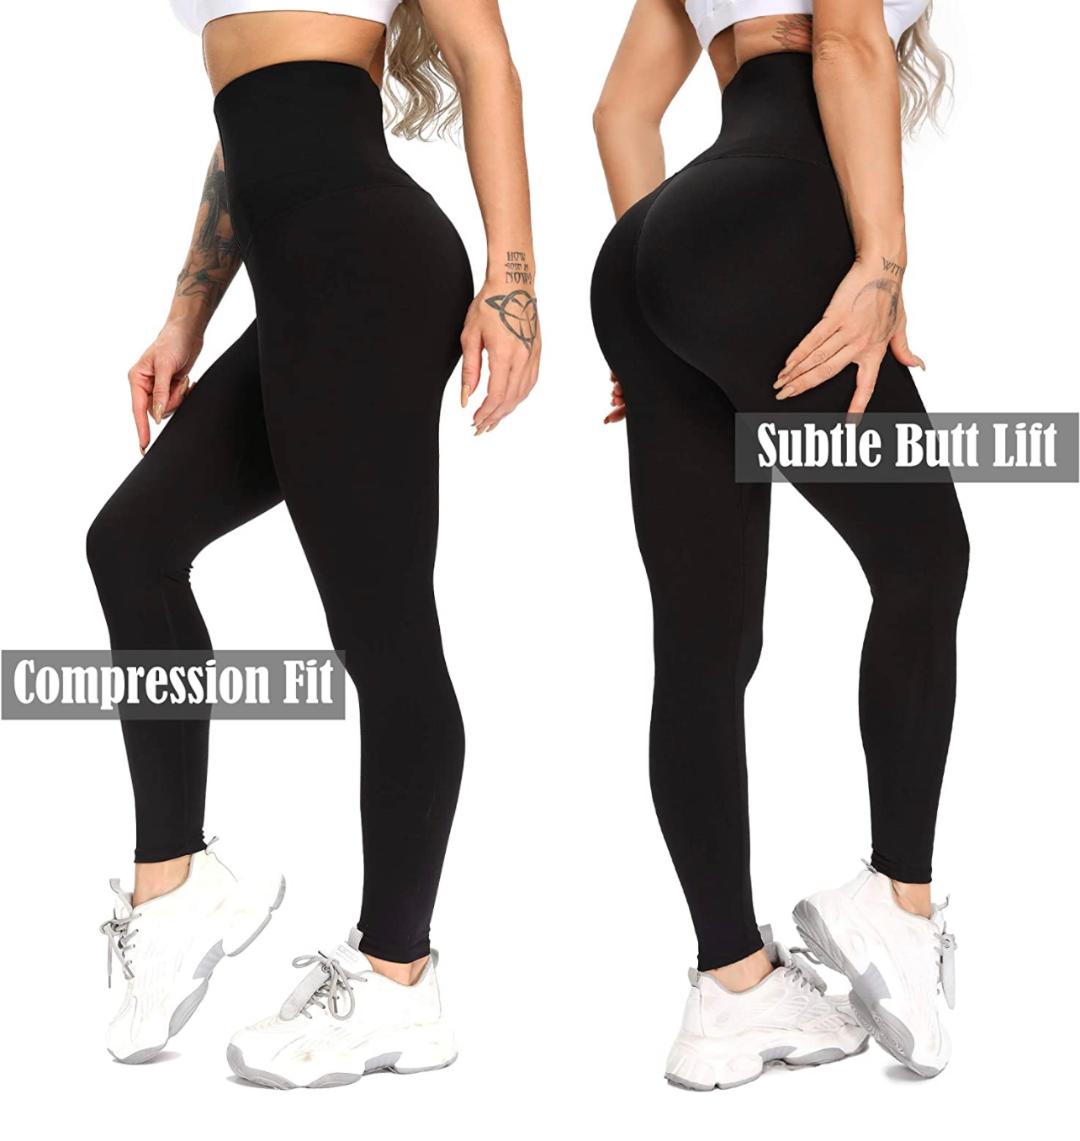 Anti Cellulite high waist slimming shapewear leggings with